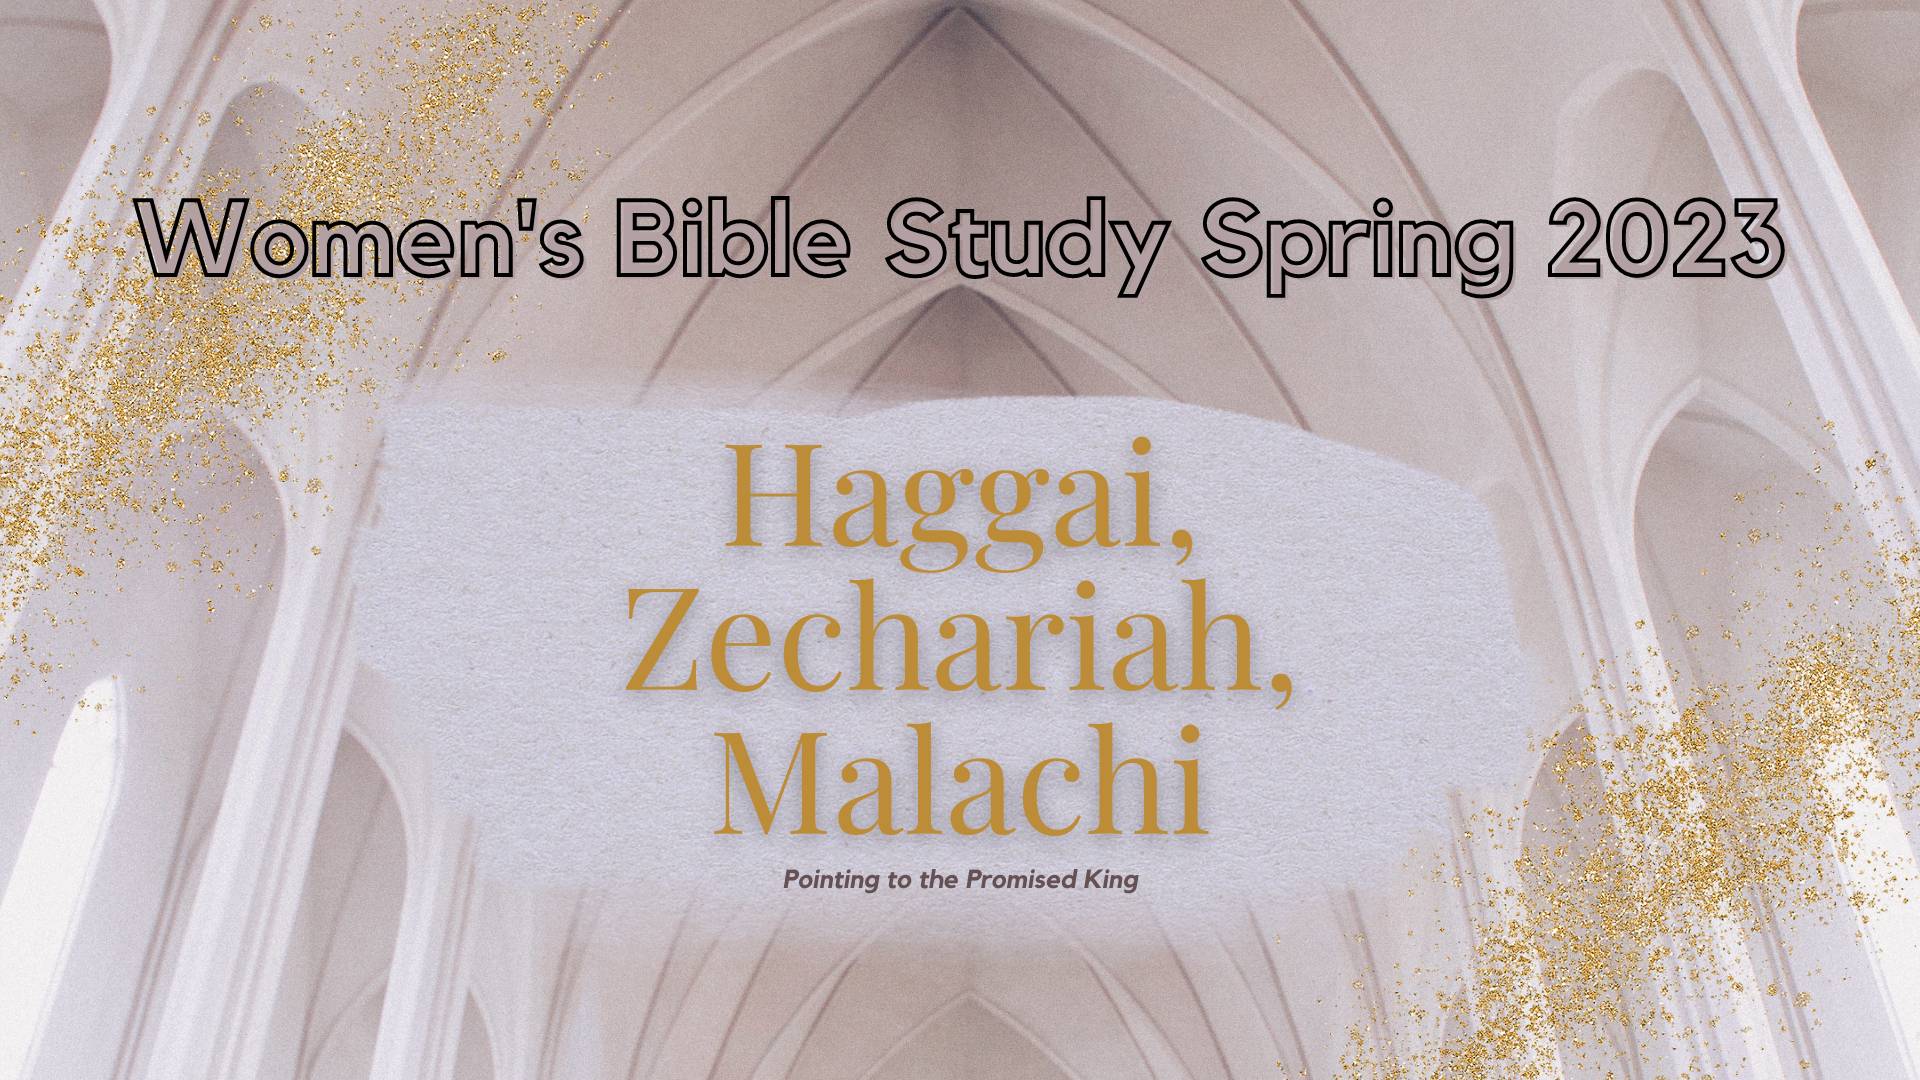 Women’s Ministry Large Group Study: What Do We Do With Our Disappointments? Final Study of Haggai, Zechariah, and Malachi.